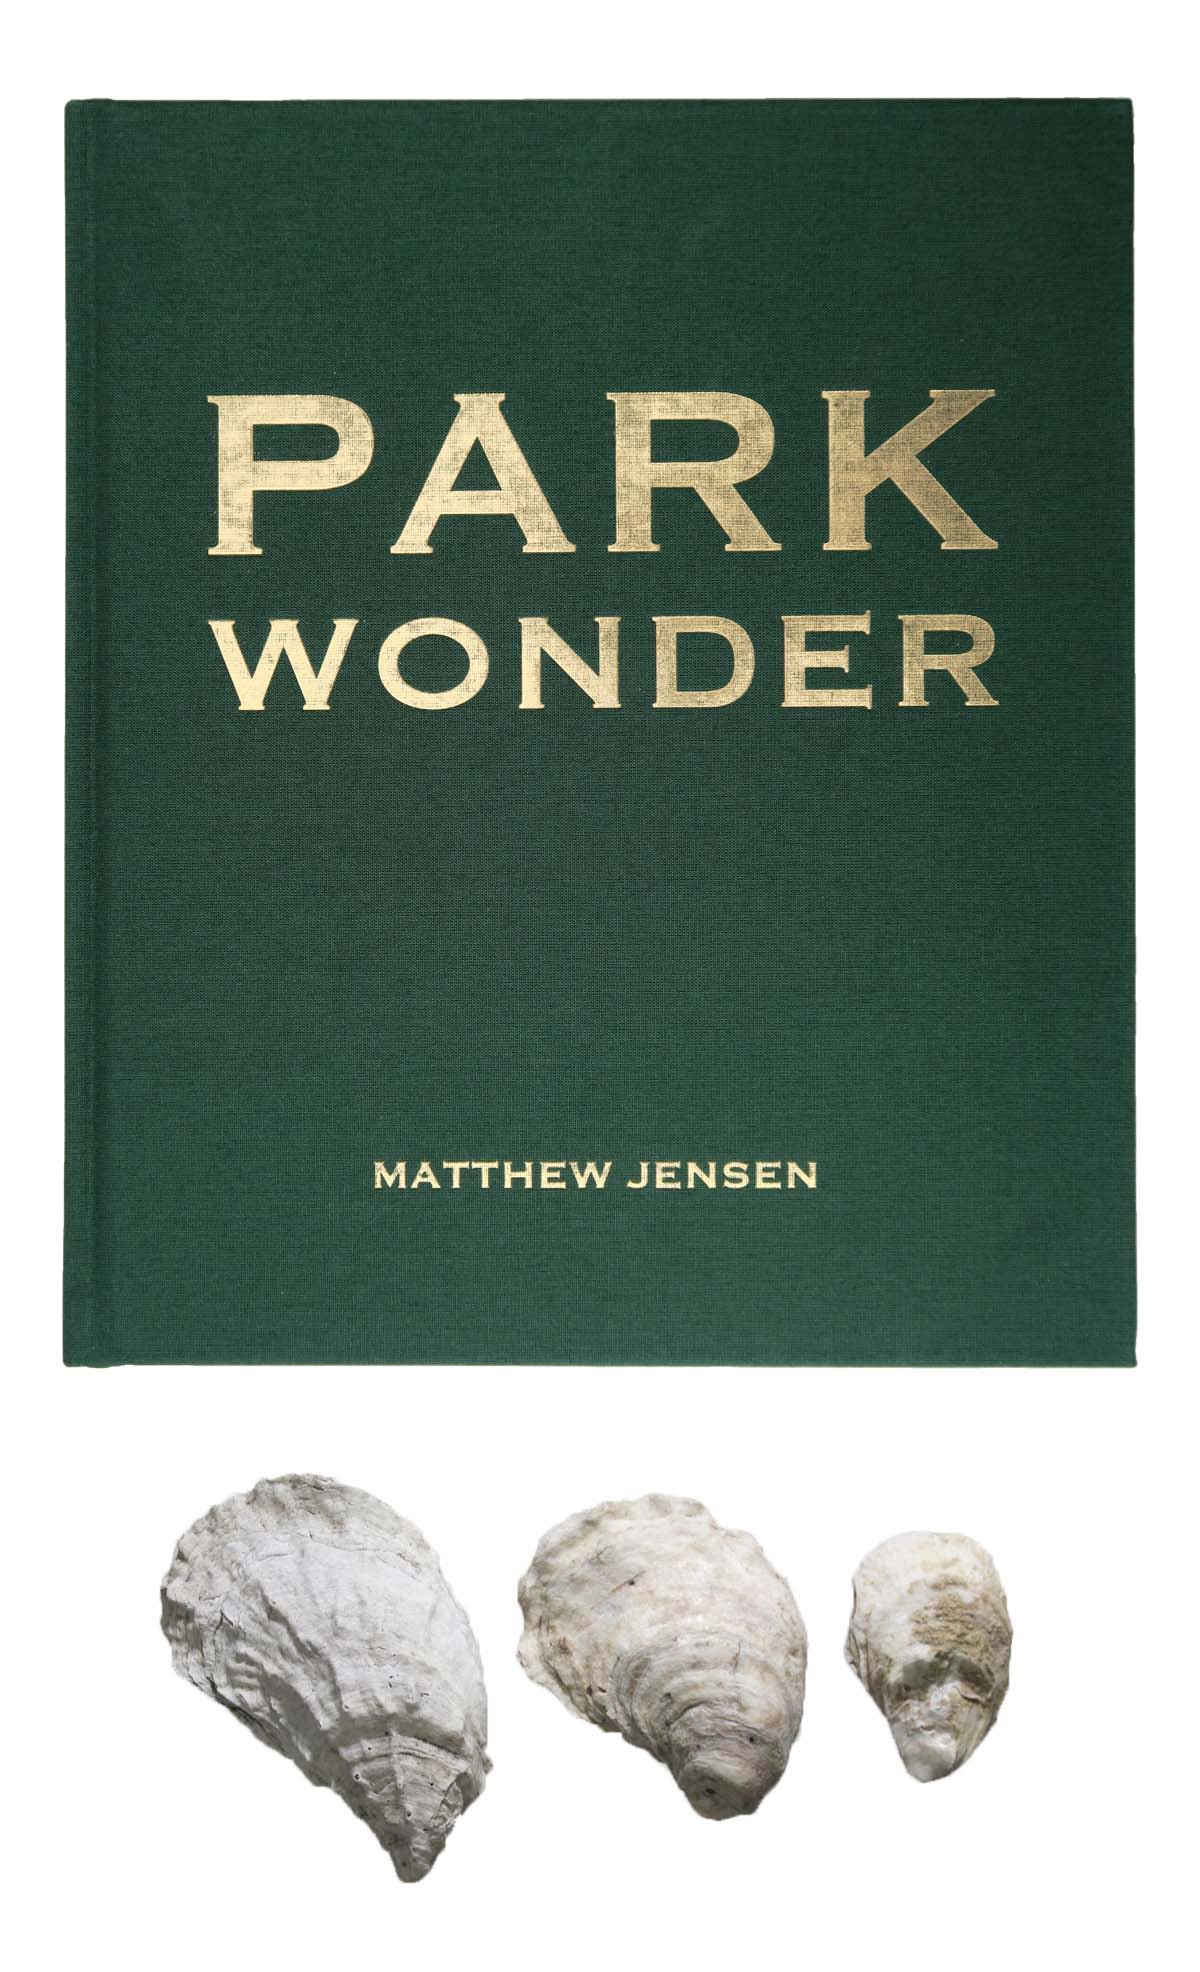 Park Wonder, 140-page book of essays and photographs, available online at Guttenberg Arts.